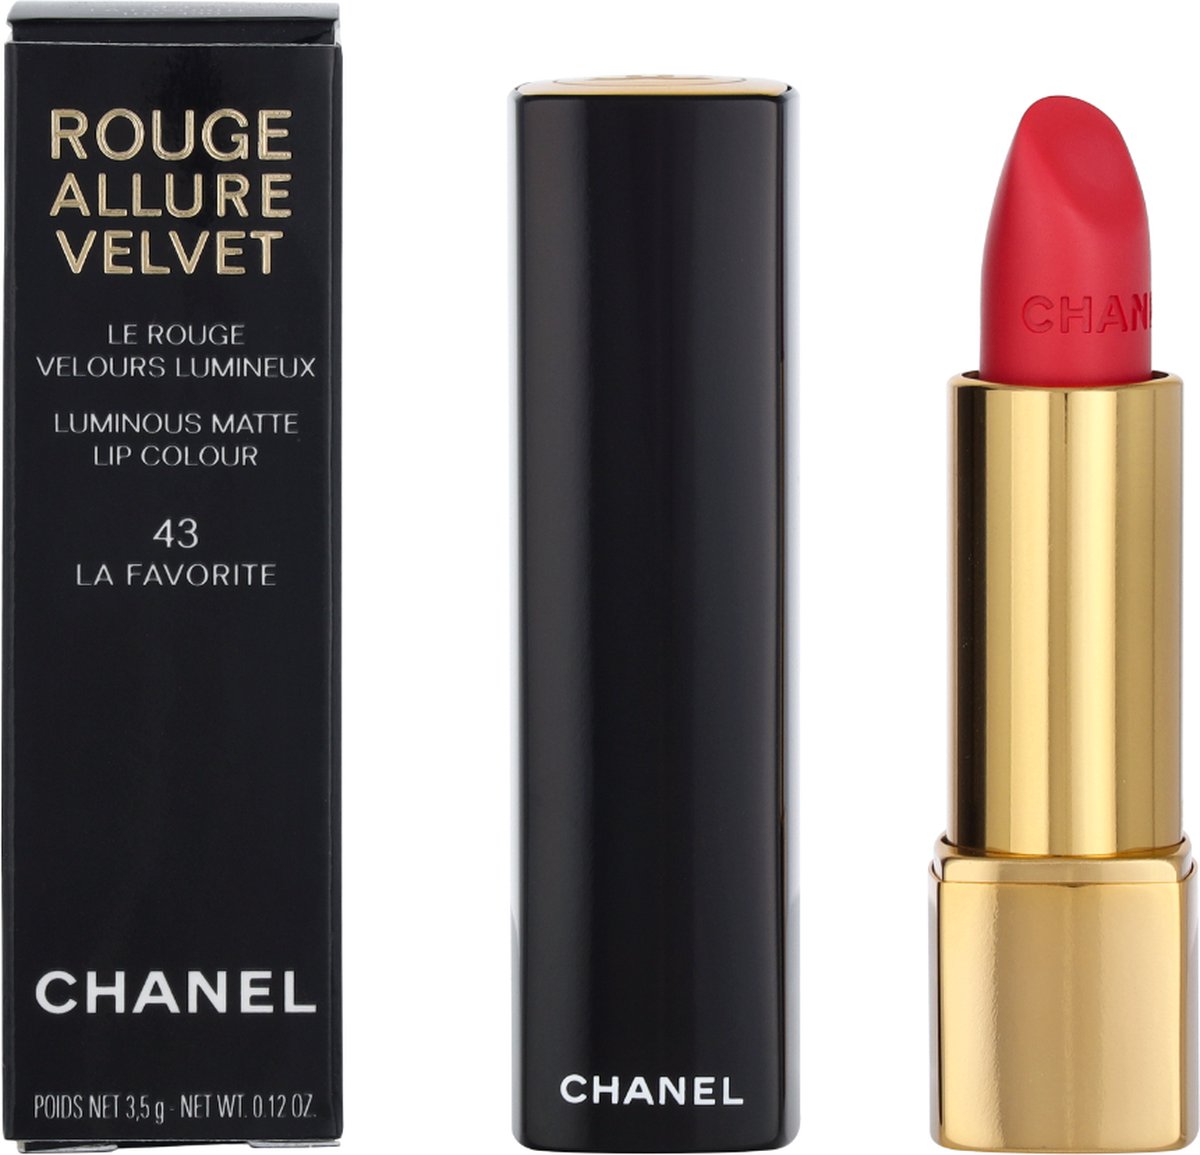 chanel number 5 lipstick